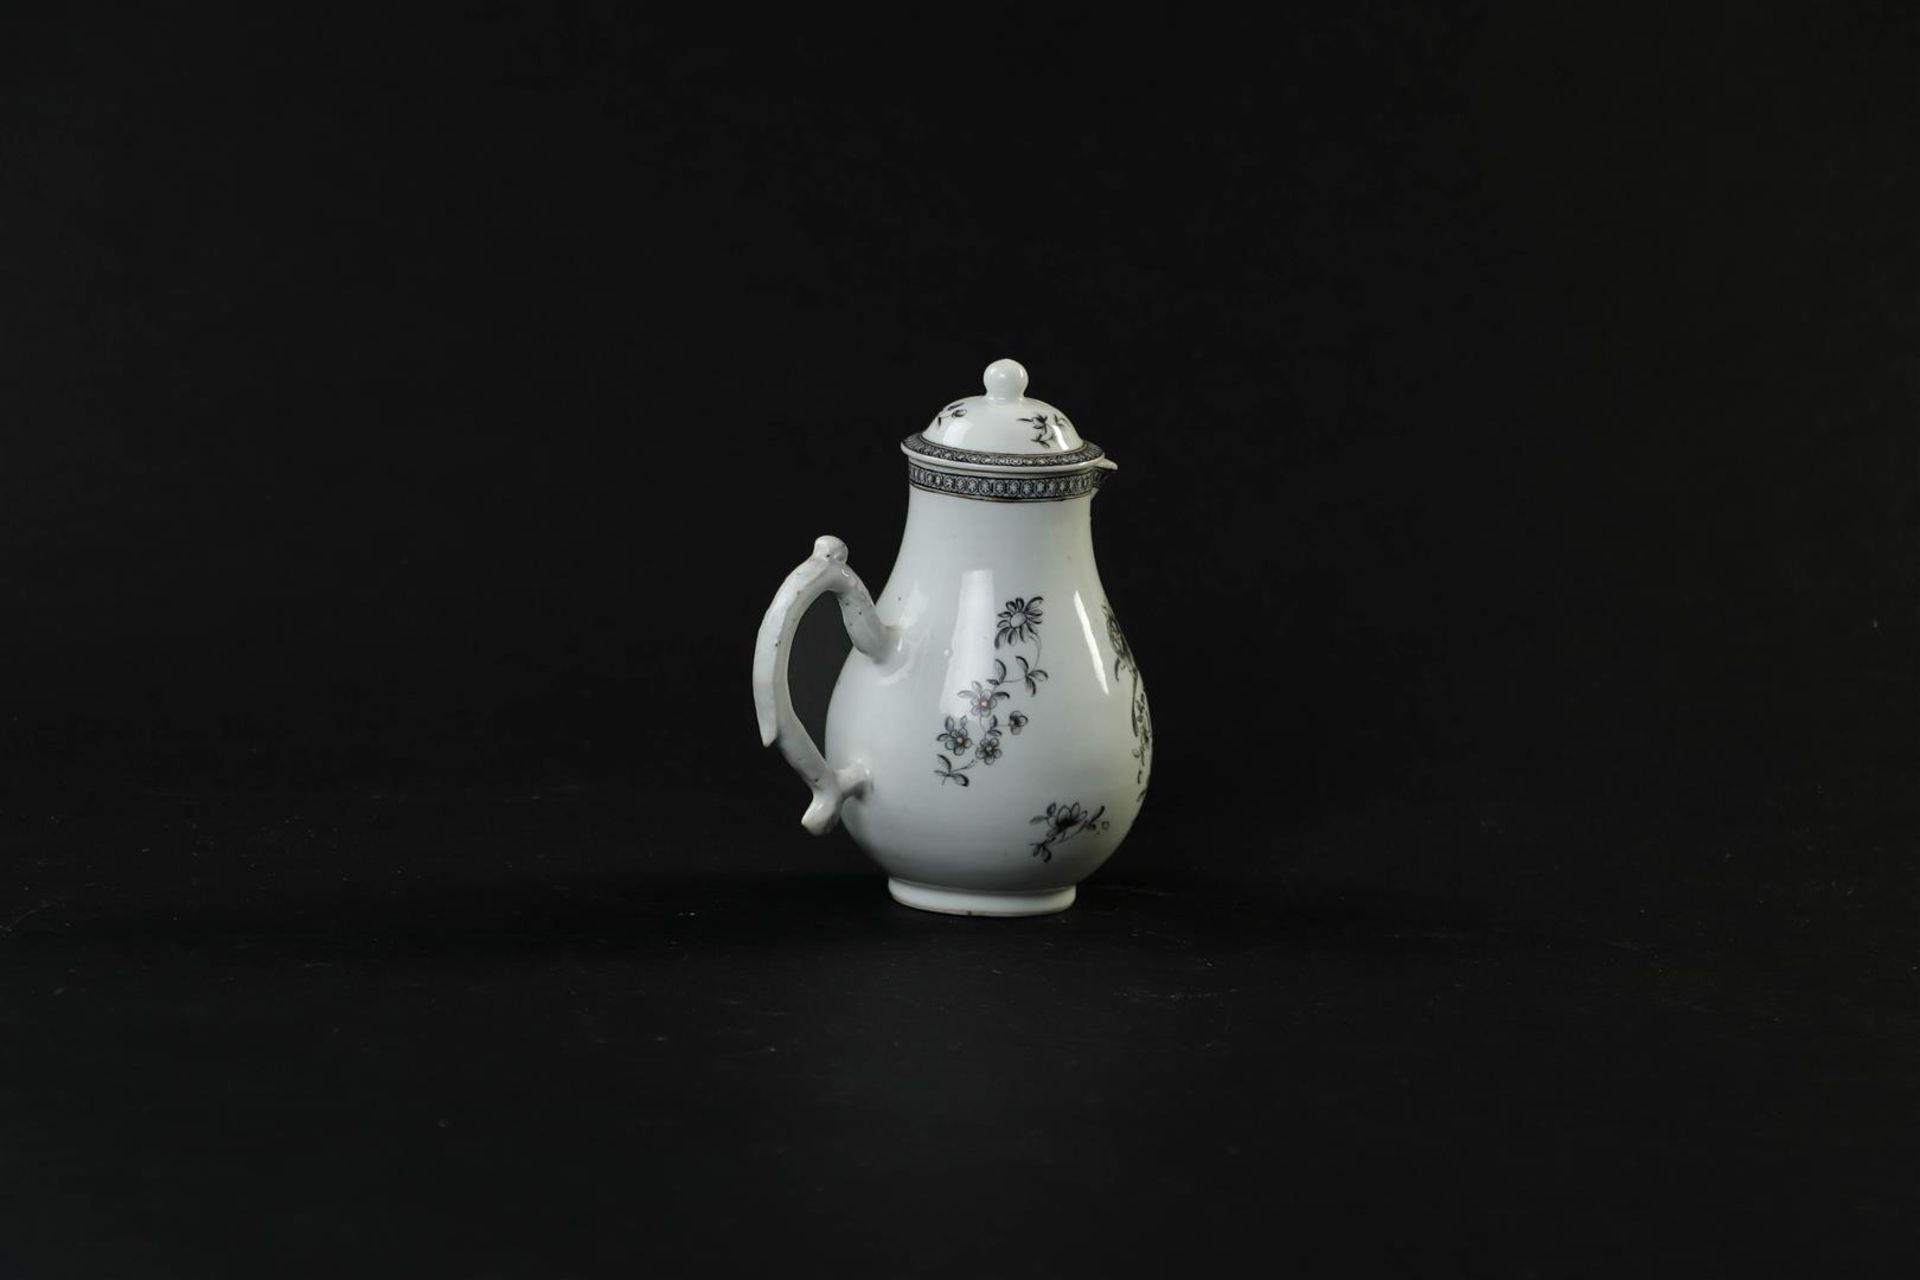 An Encre de Chine tableware set consisting of a teapot, milk jug, tea caddy, patty pan and spoon tra - Image 11 of 24